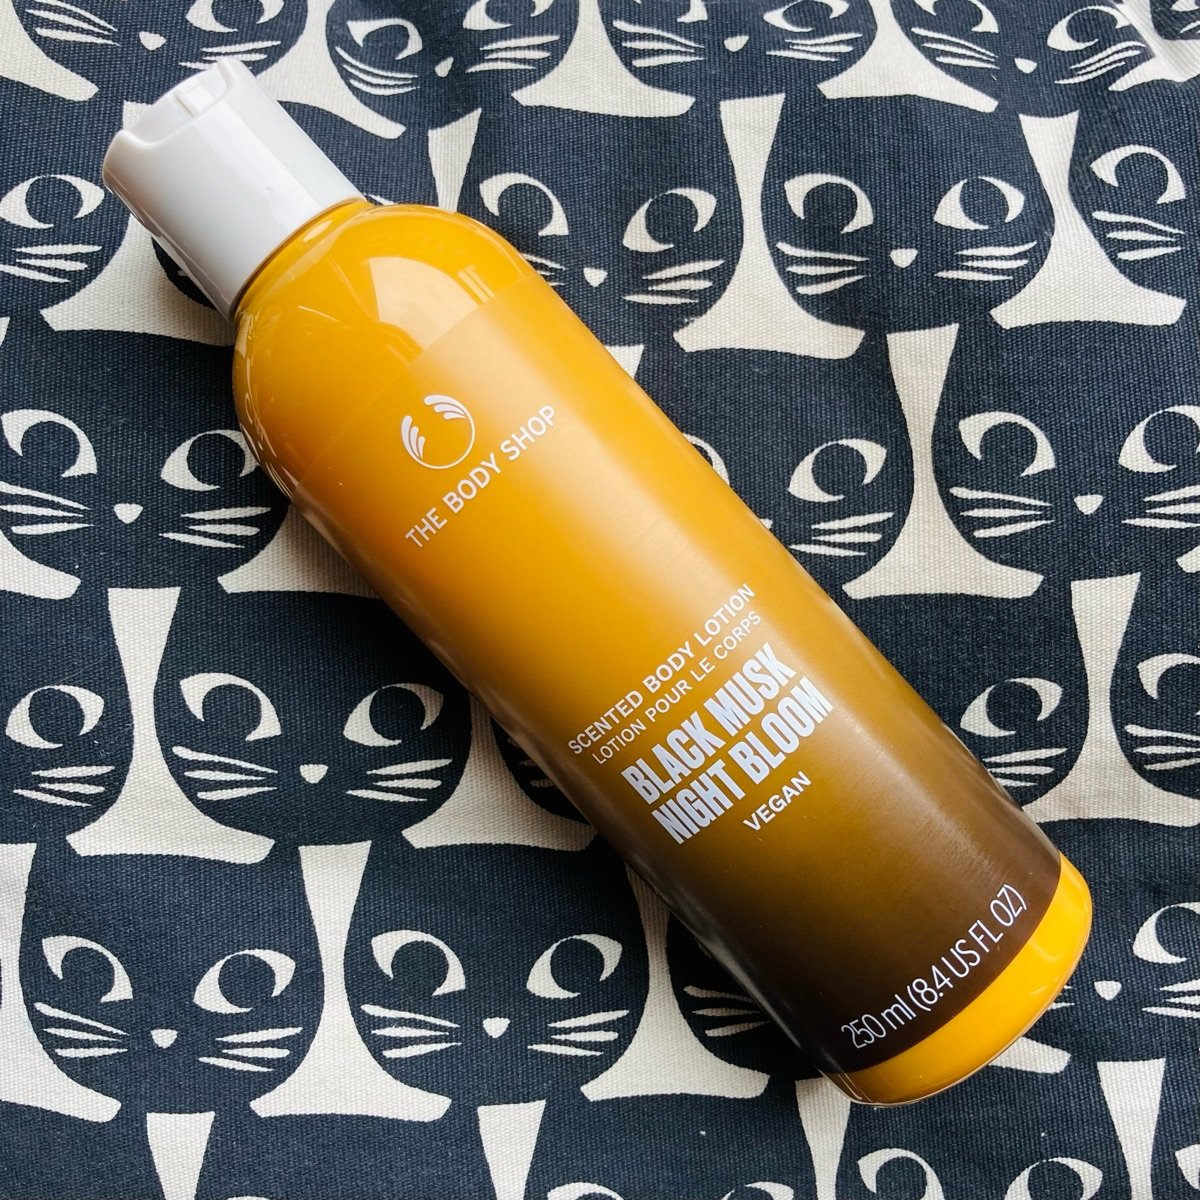 The Body Shop Black Musk Night Bloom Scented Body Lotion Reviews | abillion